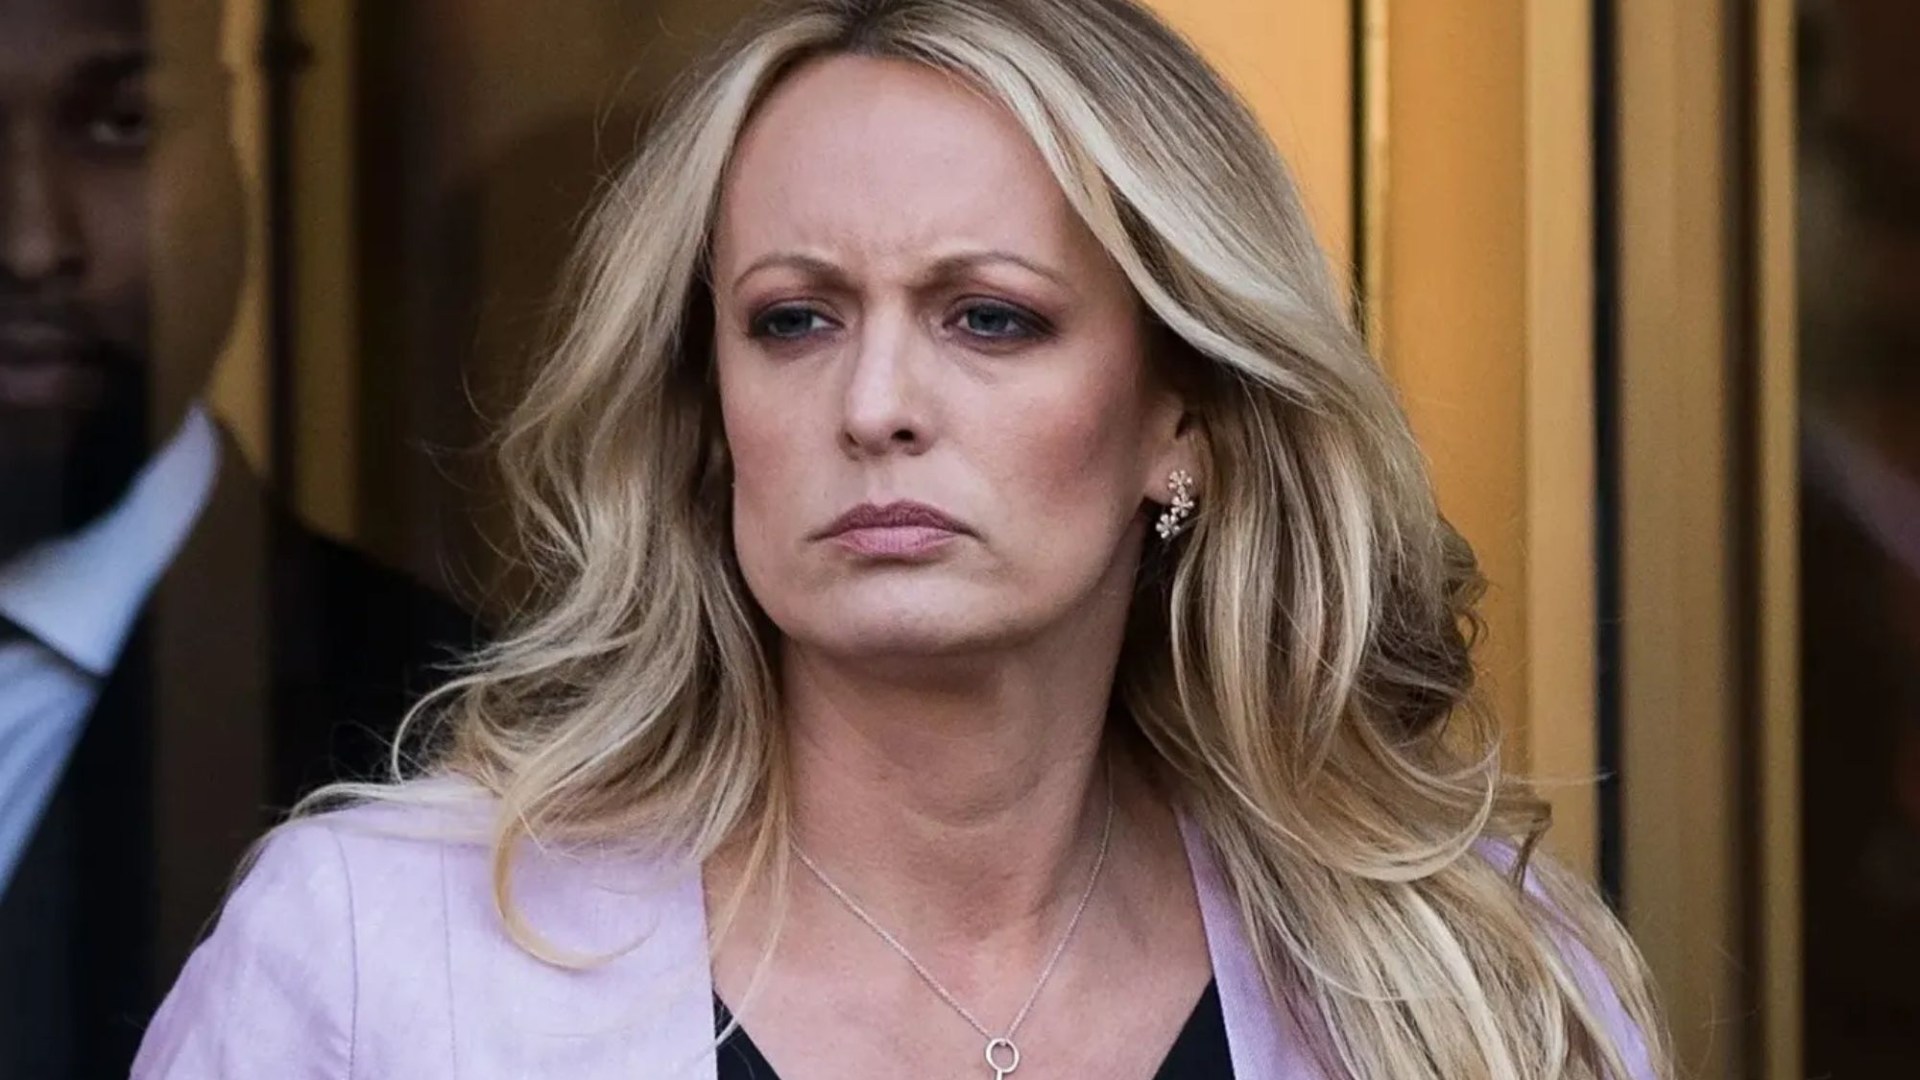 Stormy Daniels gives jury blow by blow account of ‘romp with Trump’ – from spanking, no condom & comments about Melania [Video]